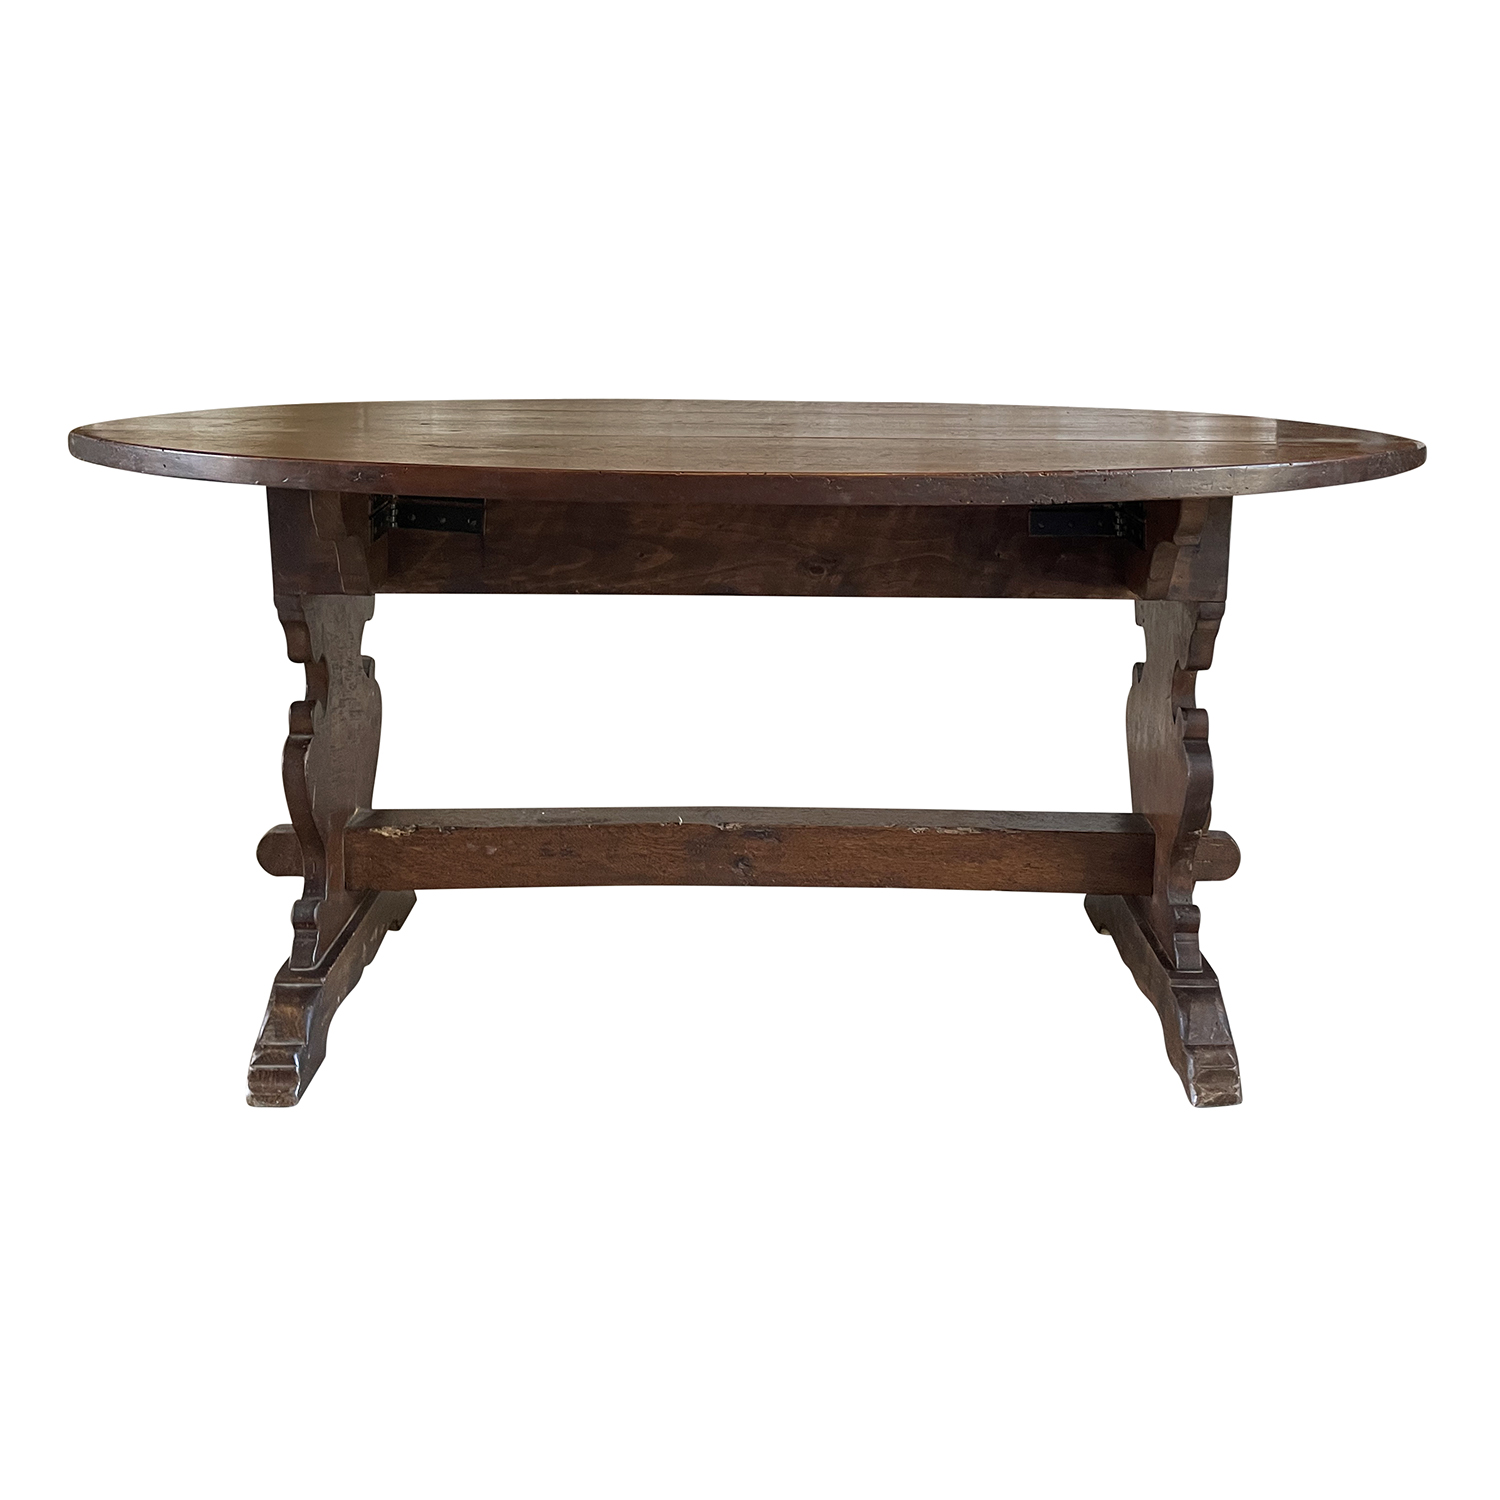 Antique Tuscan Oval Drop Leaf Table